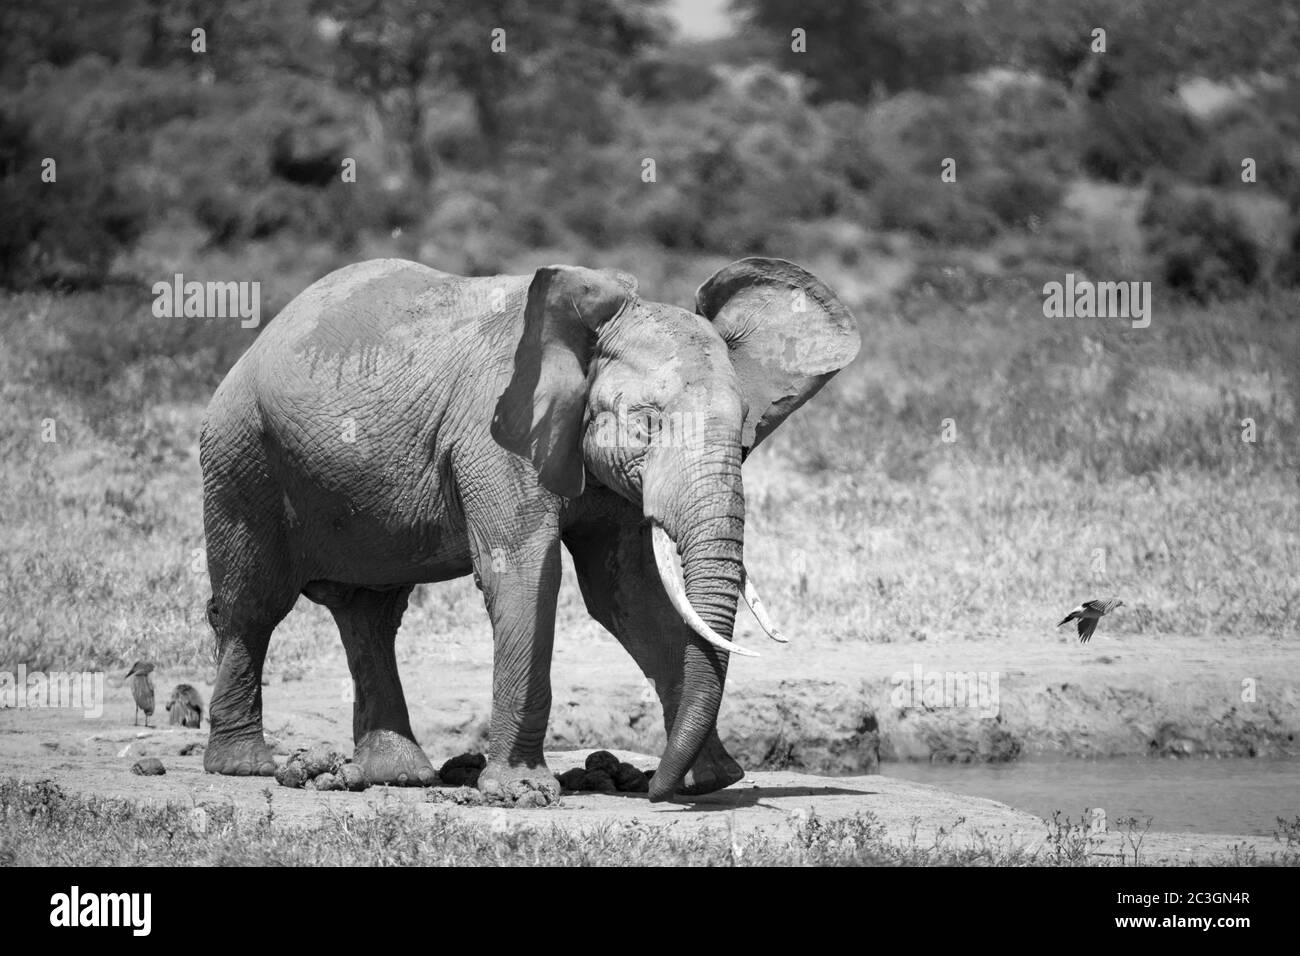 Elephants in the savannah near a water hole comes to drink Stock Photo